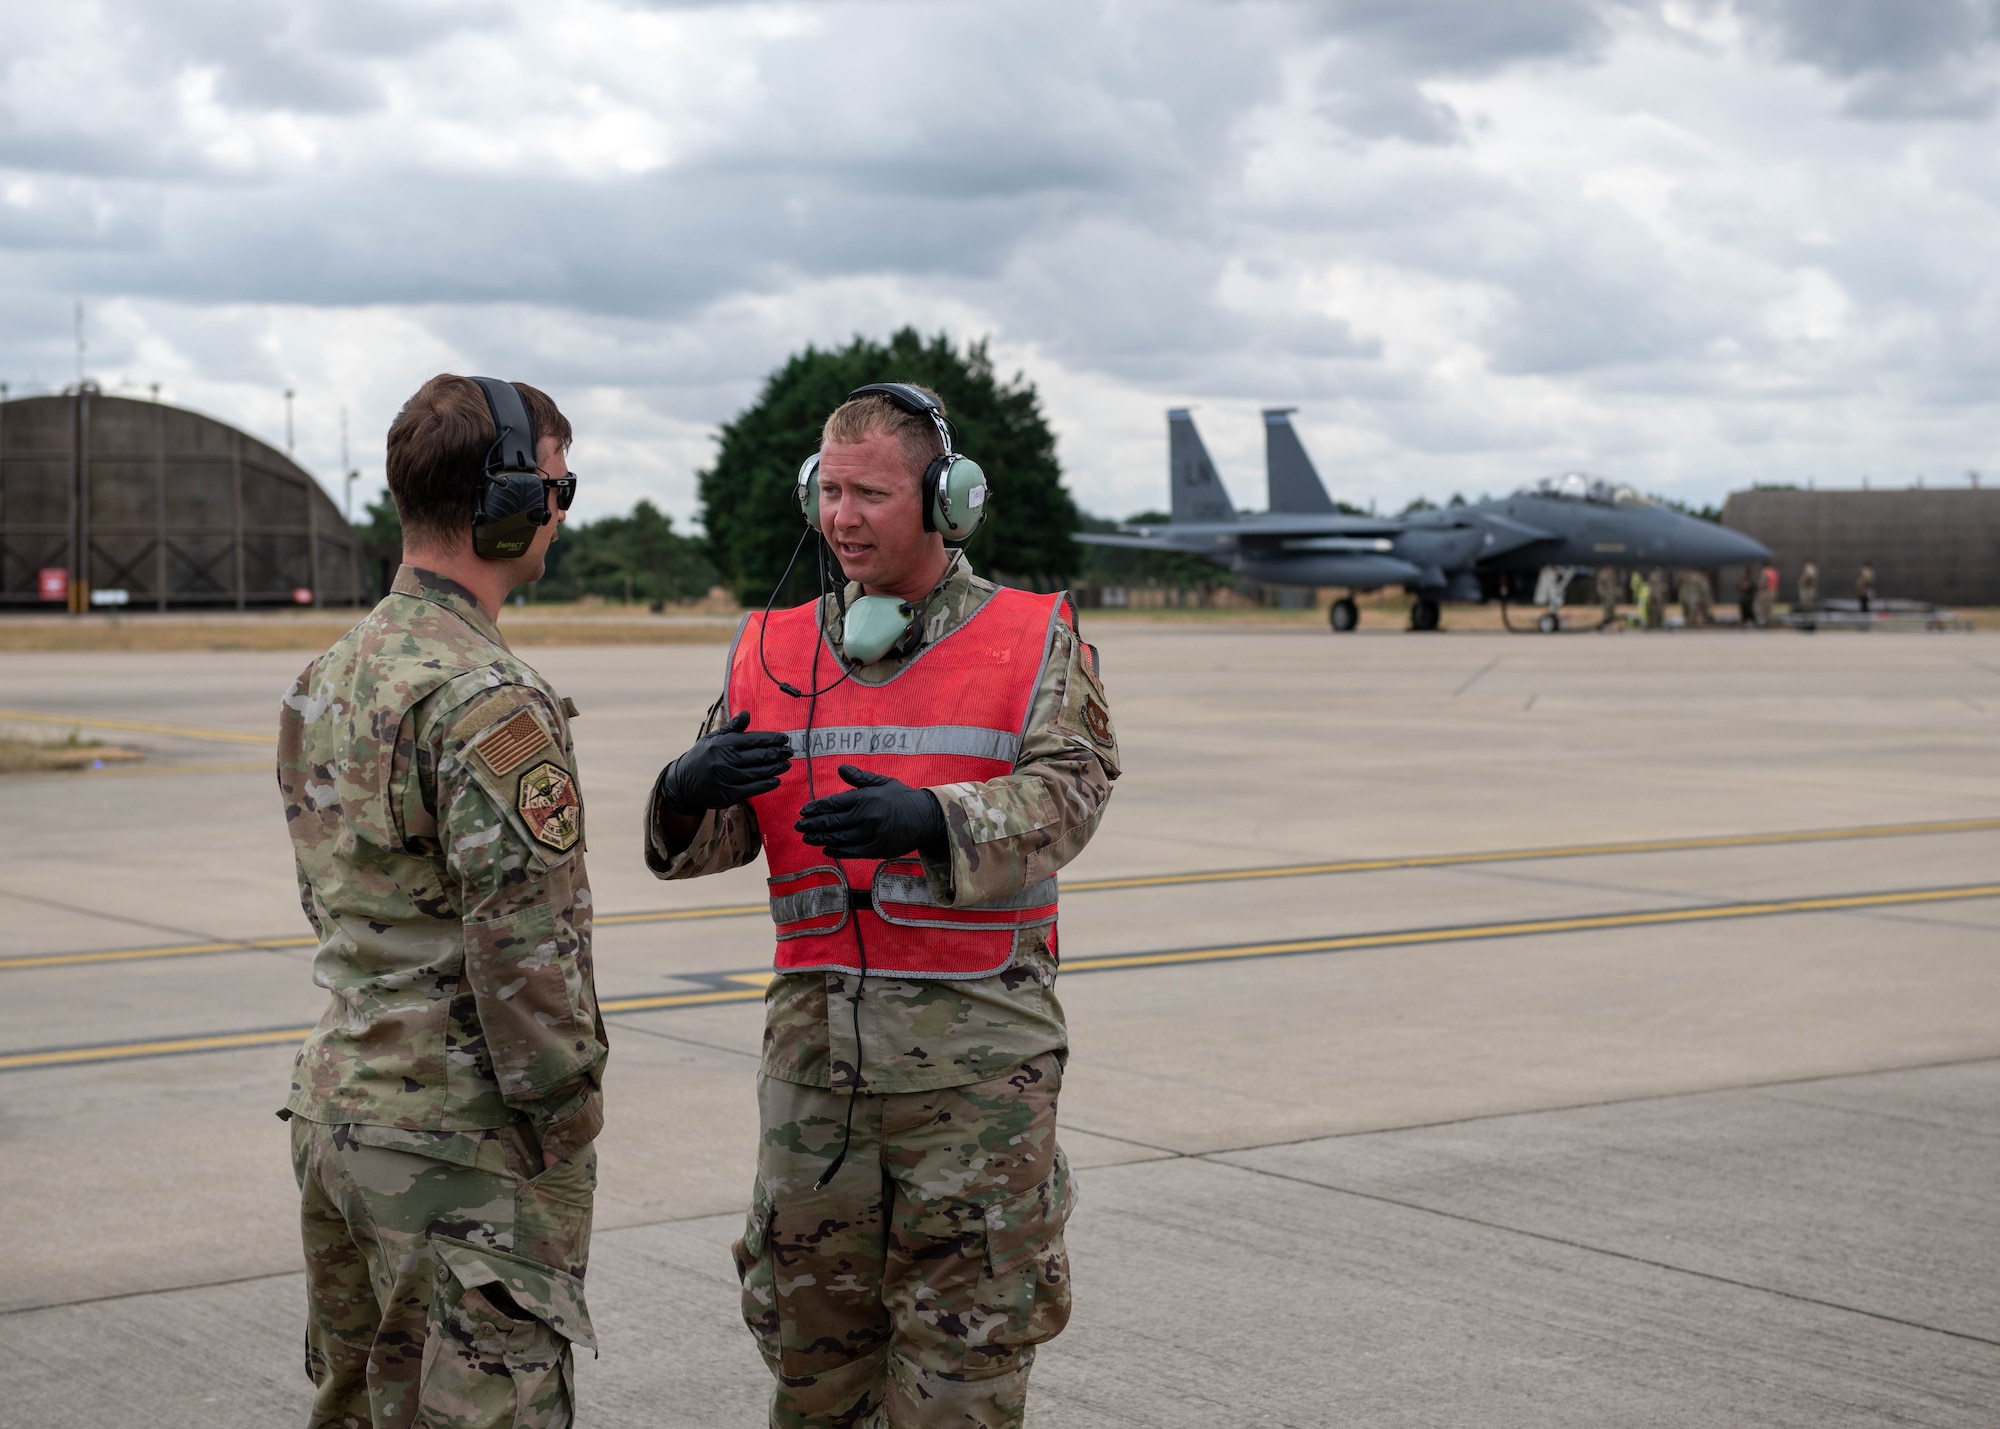 U.S. Air Force Master Sgt. Donavan Reid, 435th Contingency Response Squadron aircraft maintenance flight chief, and a 48th Maintenance Group quality assurance inspector, perform hot-pit refueling training on a F-15E Strike Eagle at Royal Air Force Lakenheath, England, July 27, 2022. This training helps enhance U.S. Air Forces in Europe’s  employment capability of contingency response teams in support assets within the theater. (U.S. Air Force photo by Airman 1st Class Olivia Gibson)